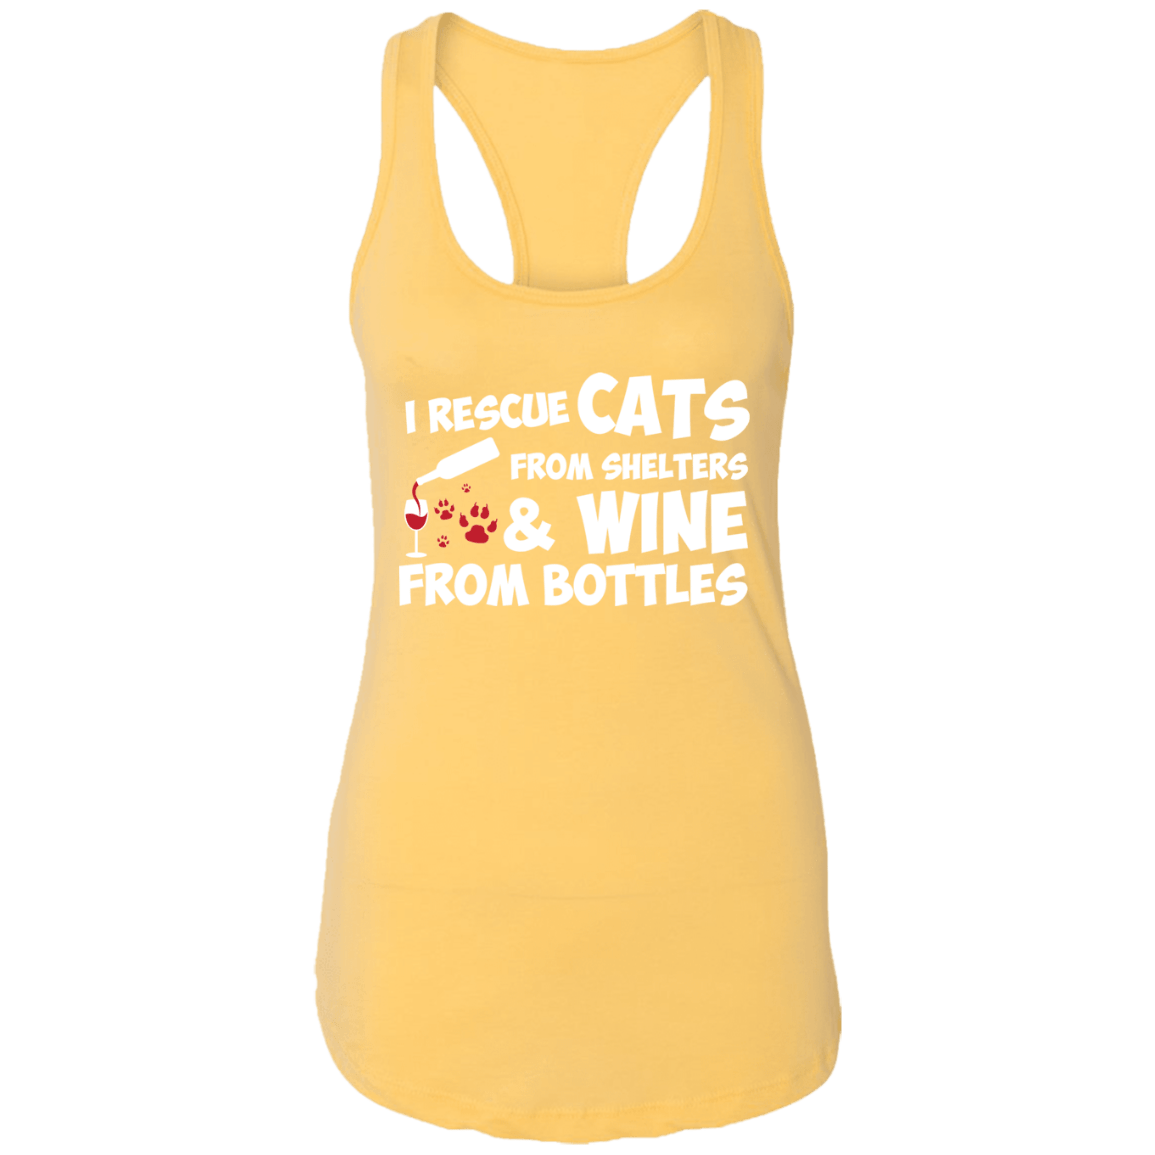 I Rescue Cats And Wine - Ladies Racer Back Tank.